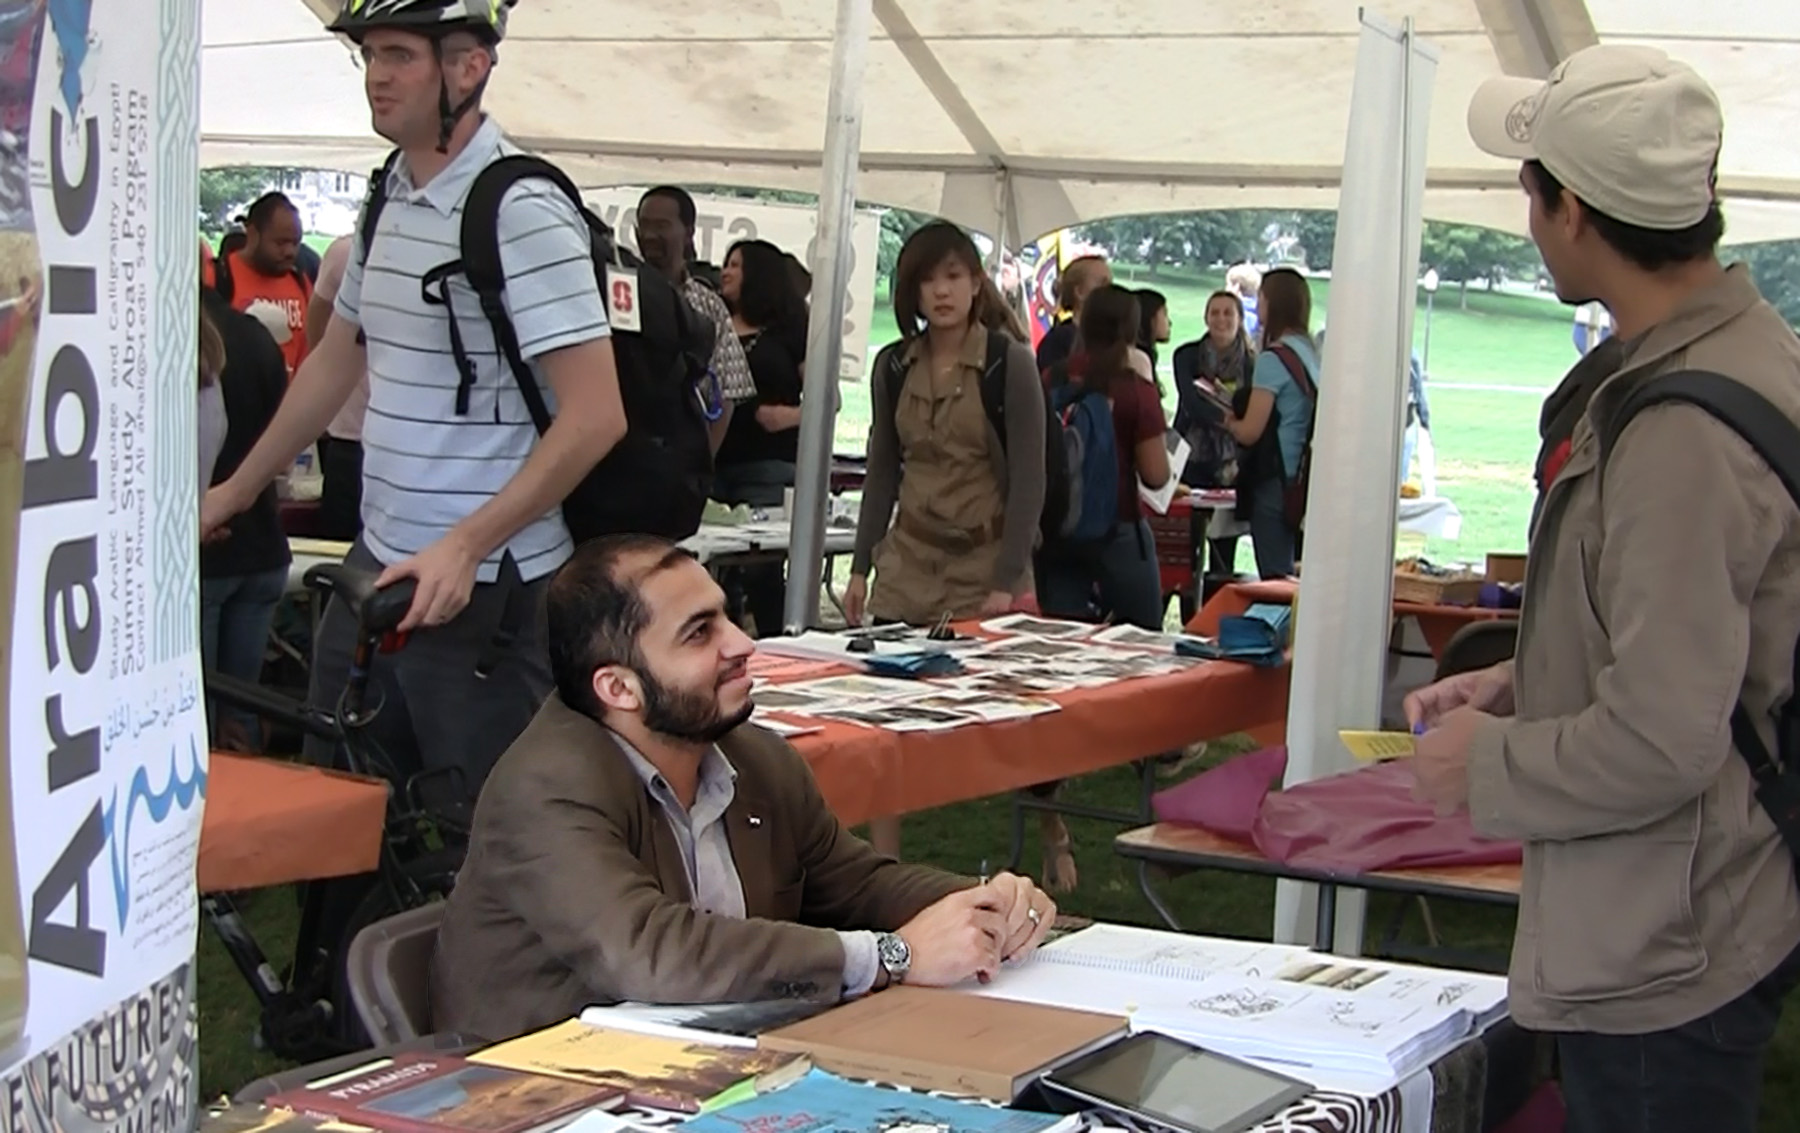 Ali Ahmed talks to students at the study abroad fair.